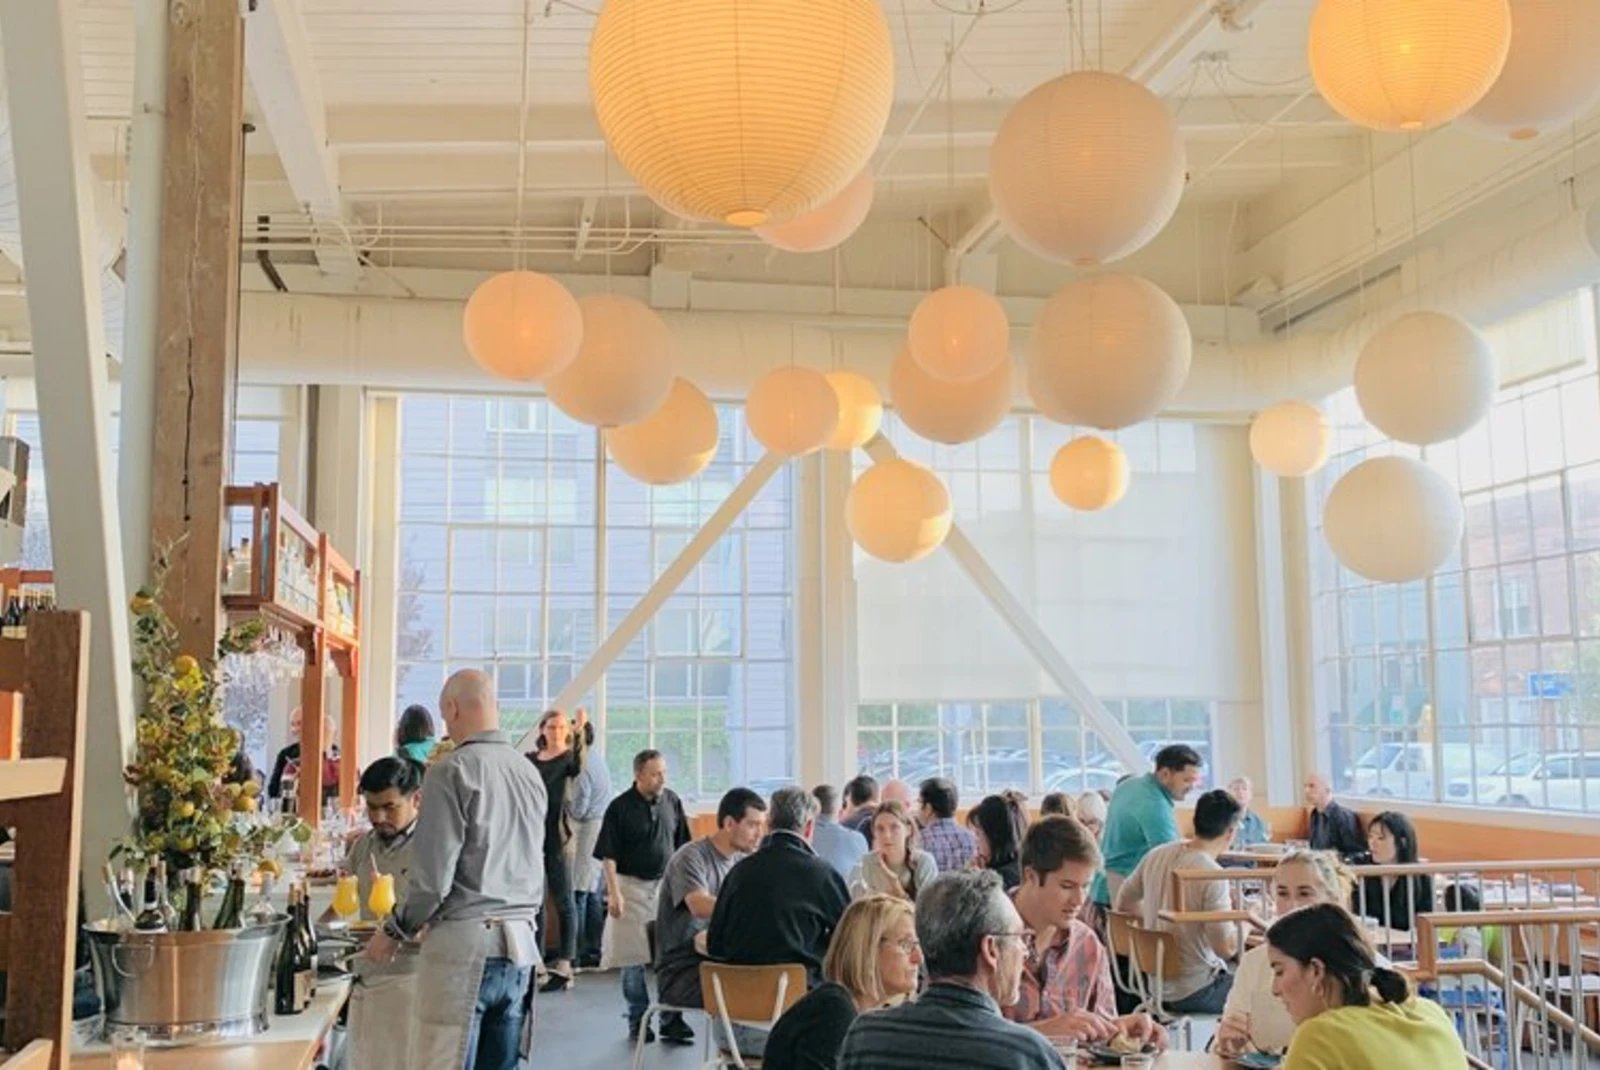 people sitting at tables in a room with orange balloons